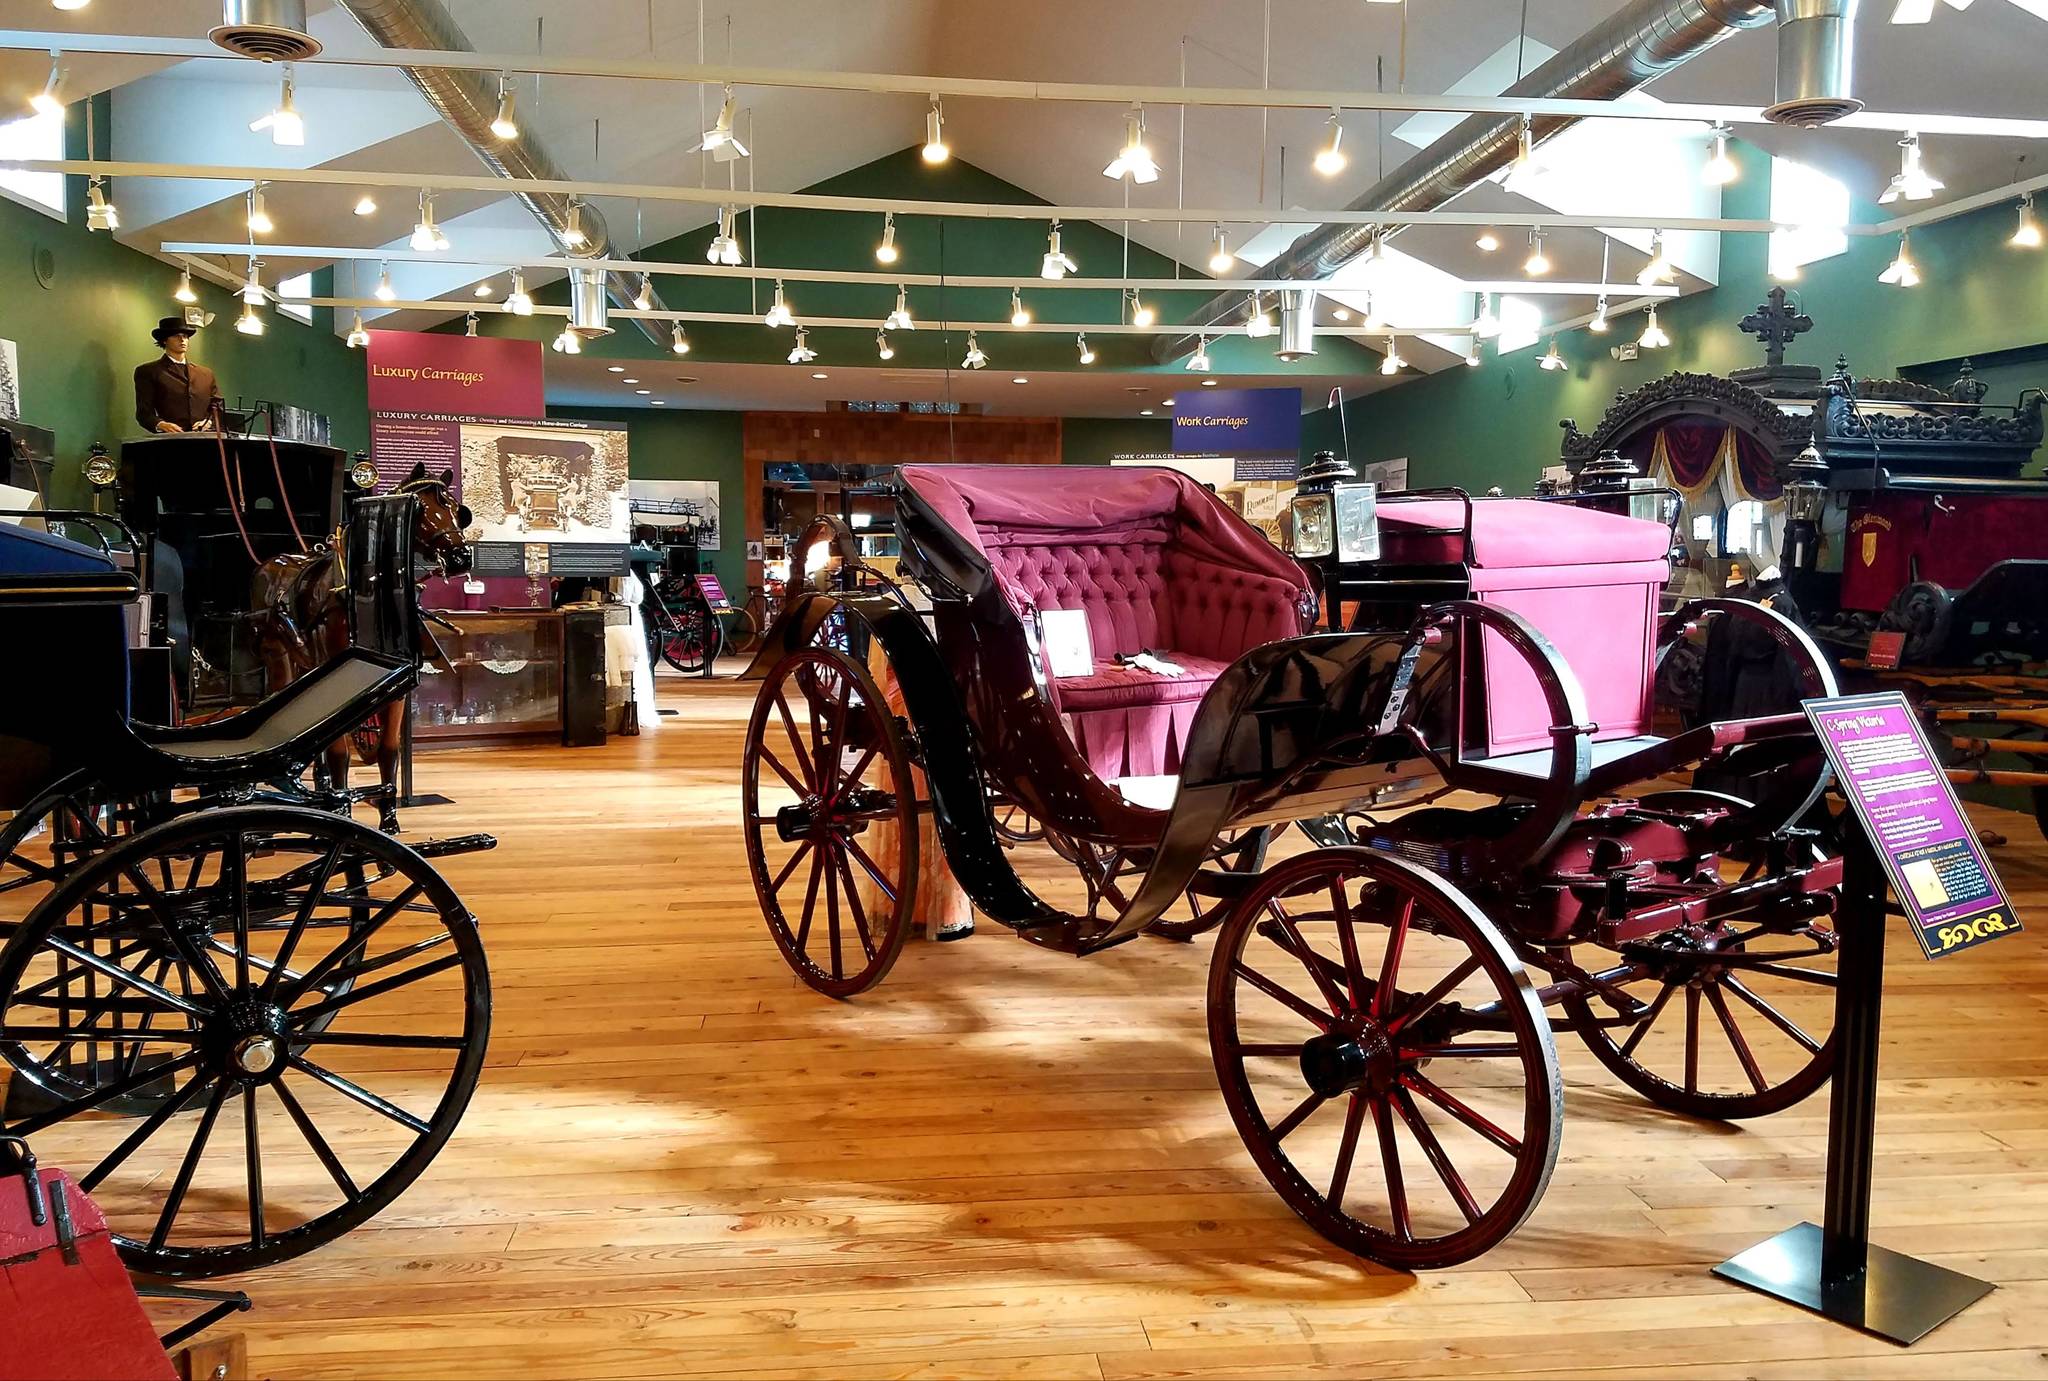 Courtesy of Northwest Carriage Museum
The museum in Raymond is home to one of America’s finest 19th-century, horse-drawn vehicle collections and artifacts in the country.